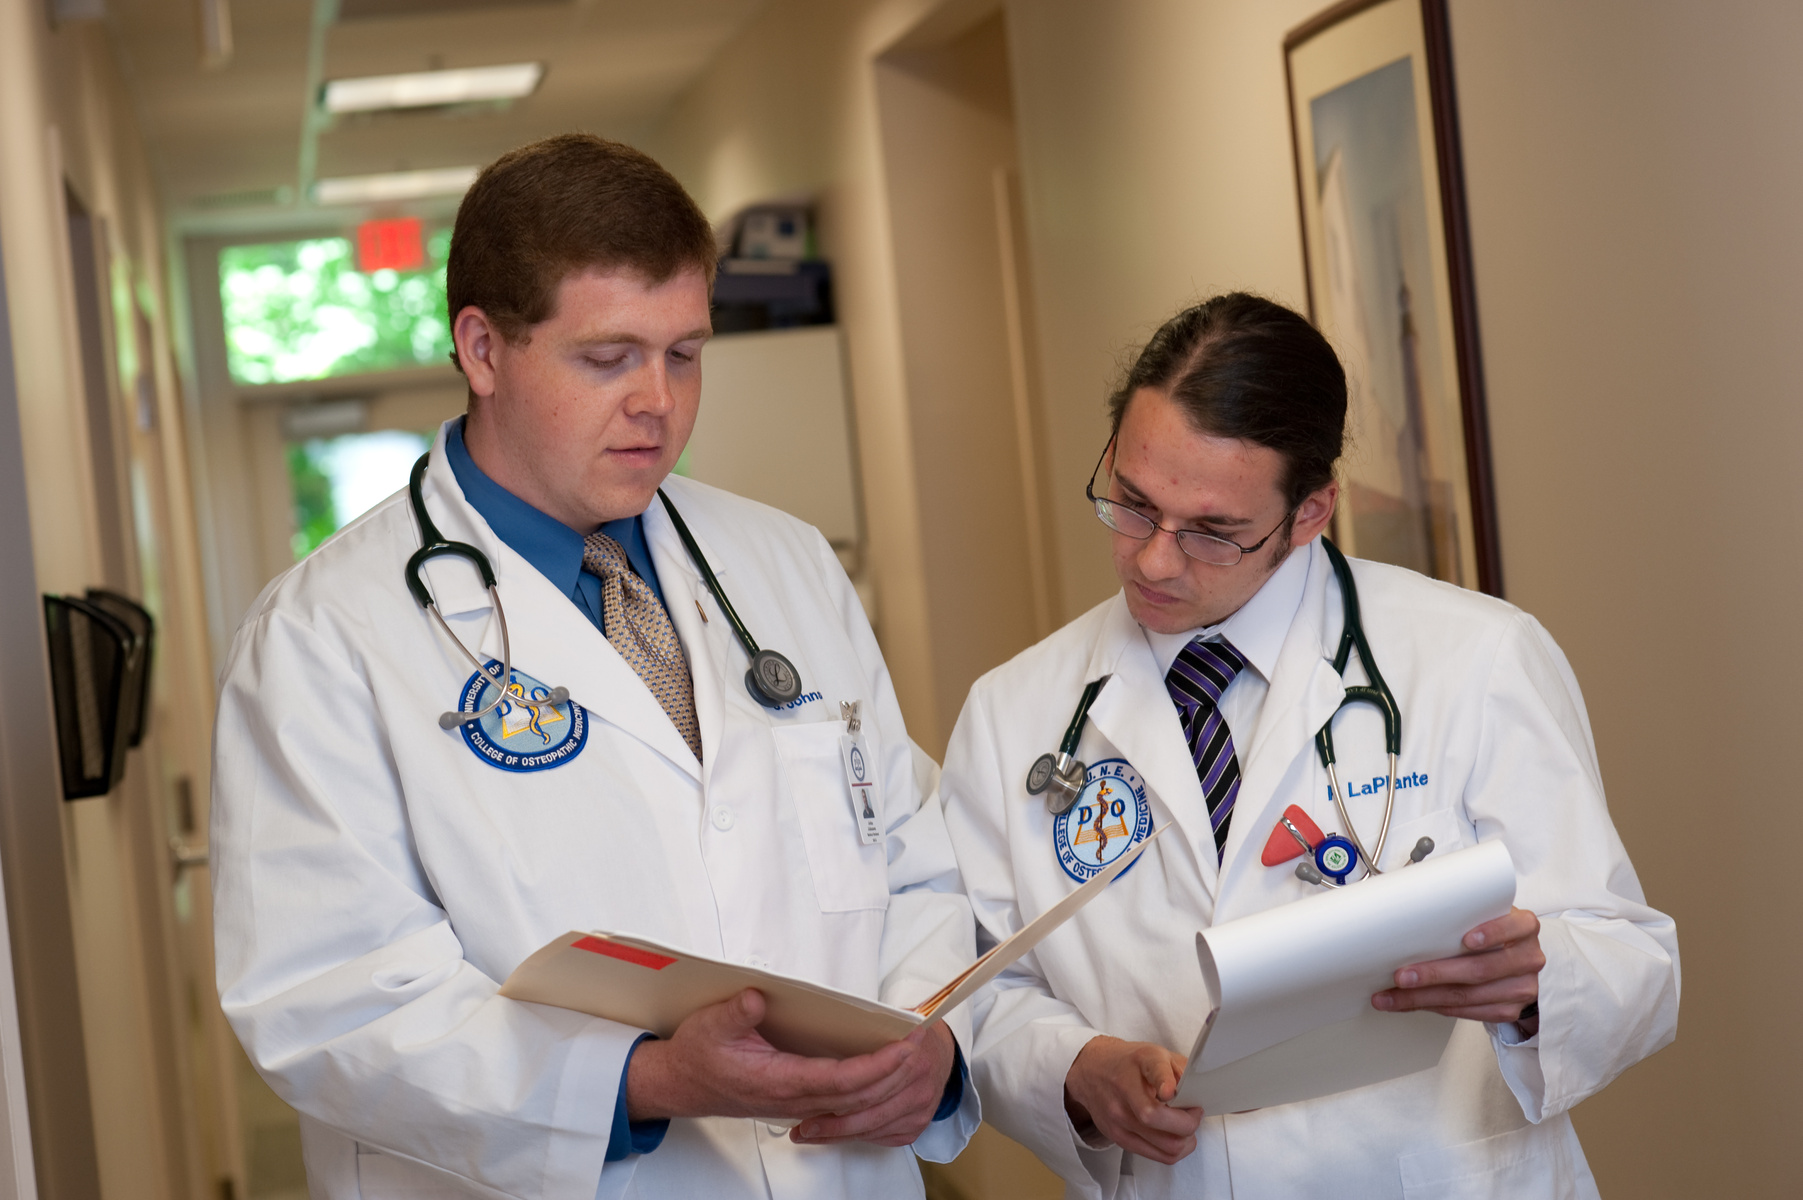 Two U N E medical students stand in a hallway examining a patient's chart